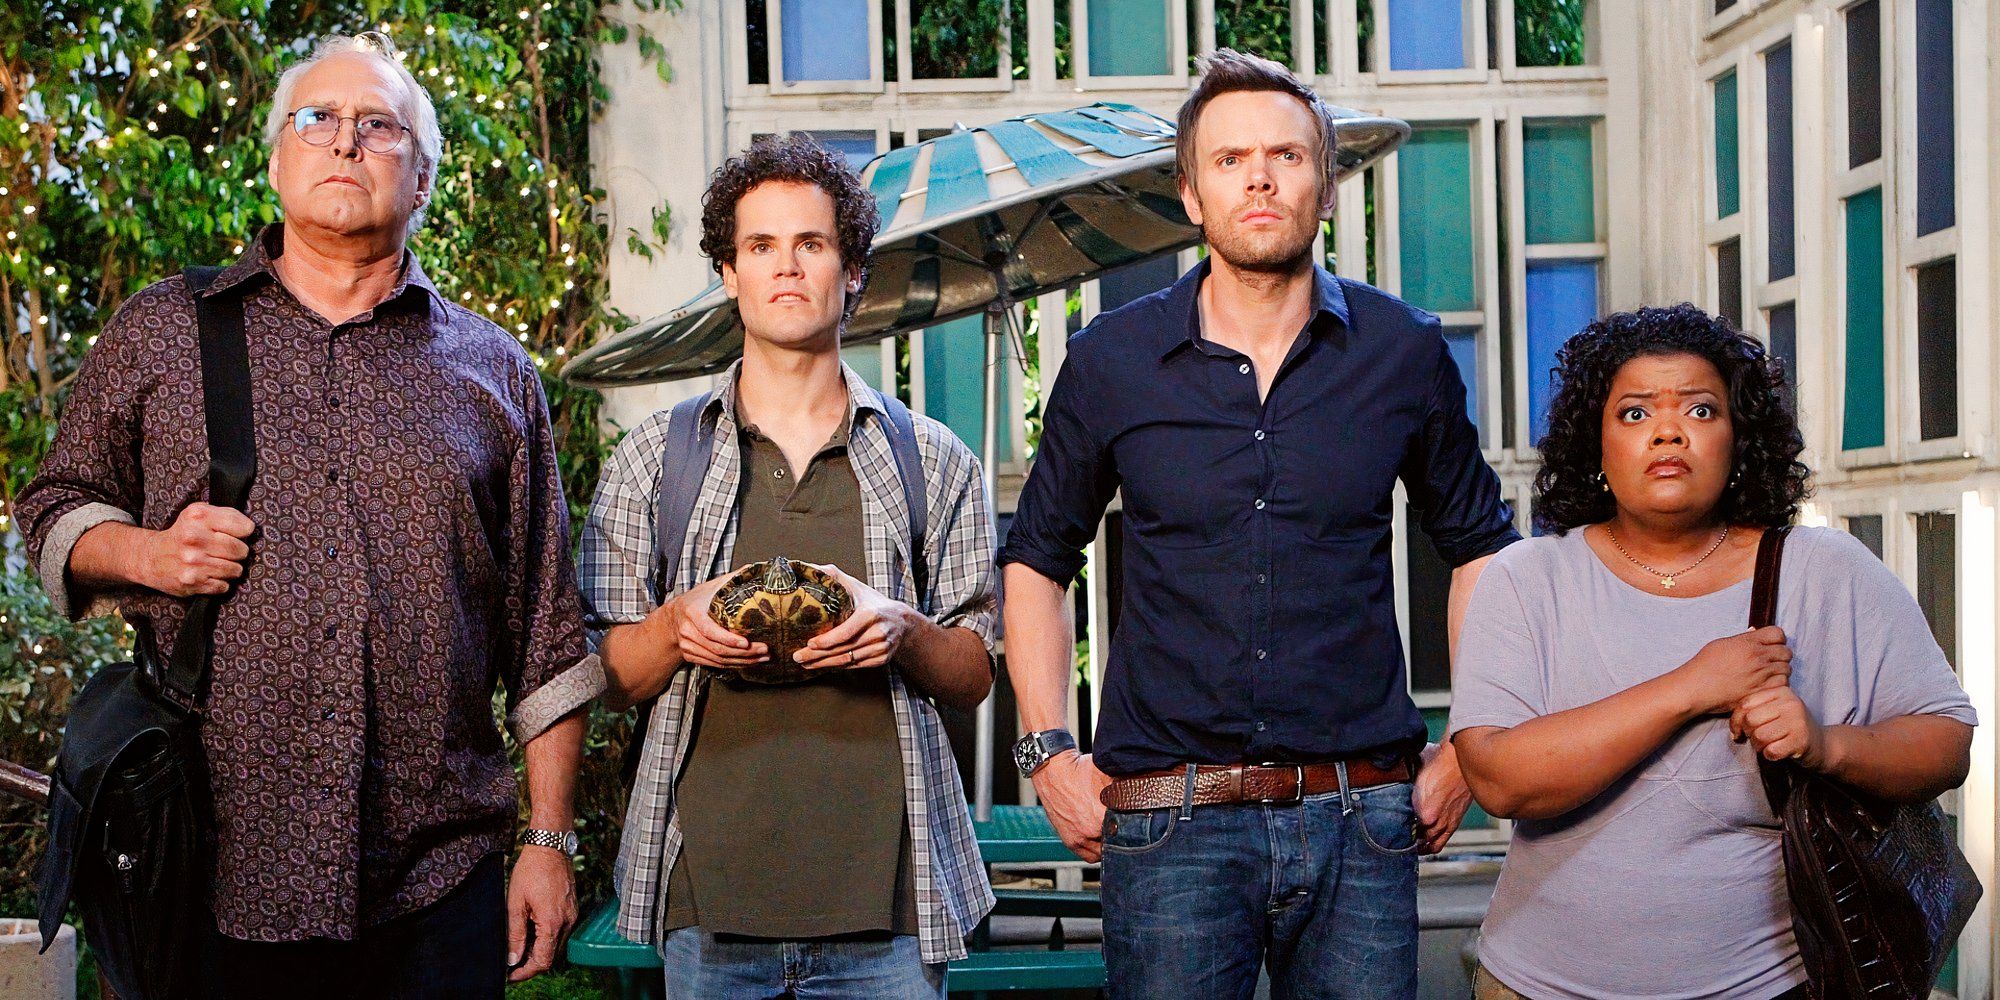 Pierce Hawthorne, Todd Jacobson, Jeff Winger, and Shirley Bennett in Community 